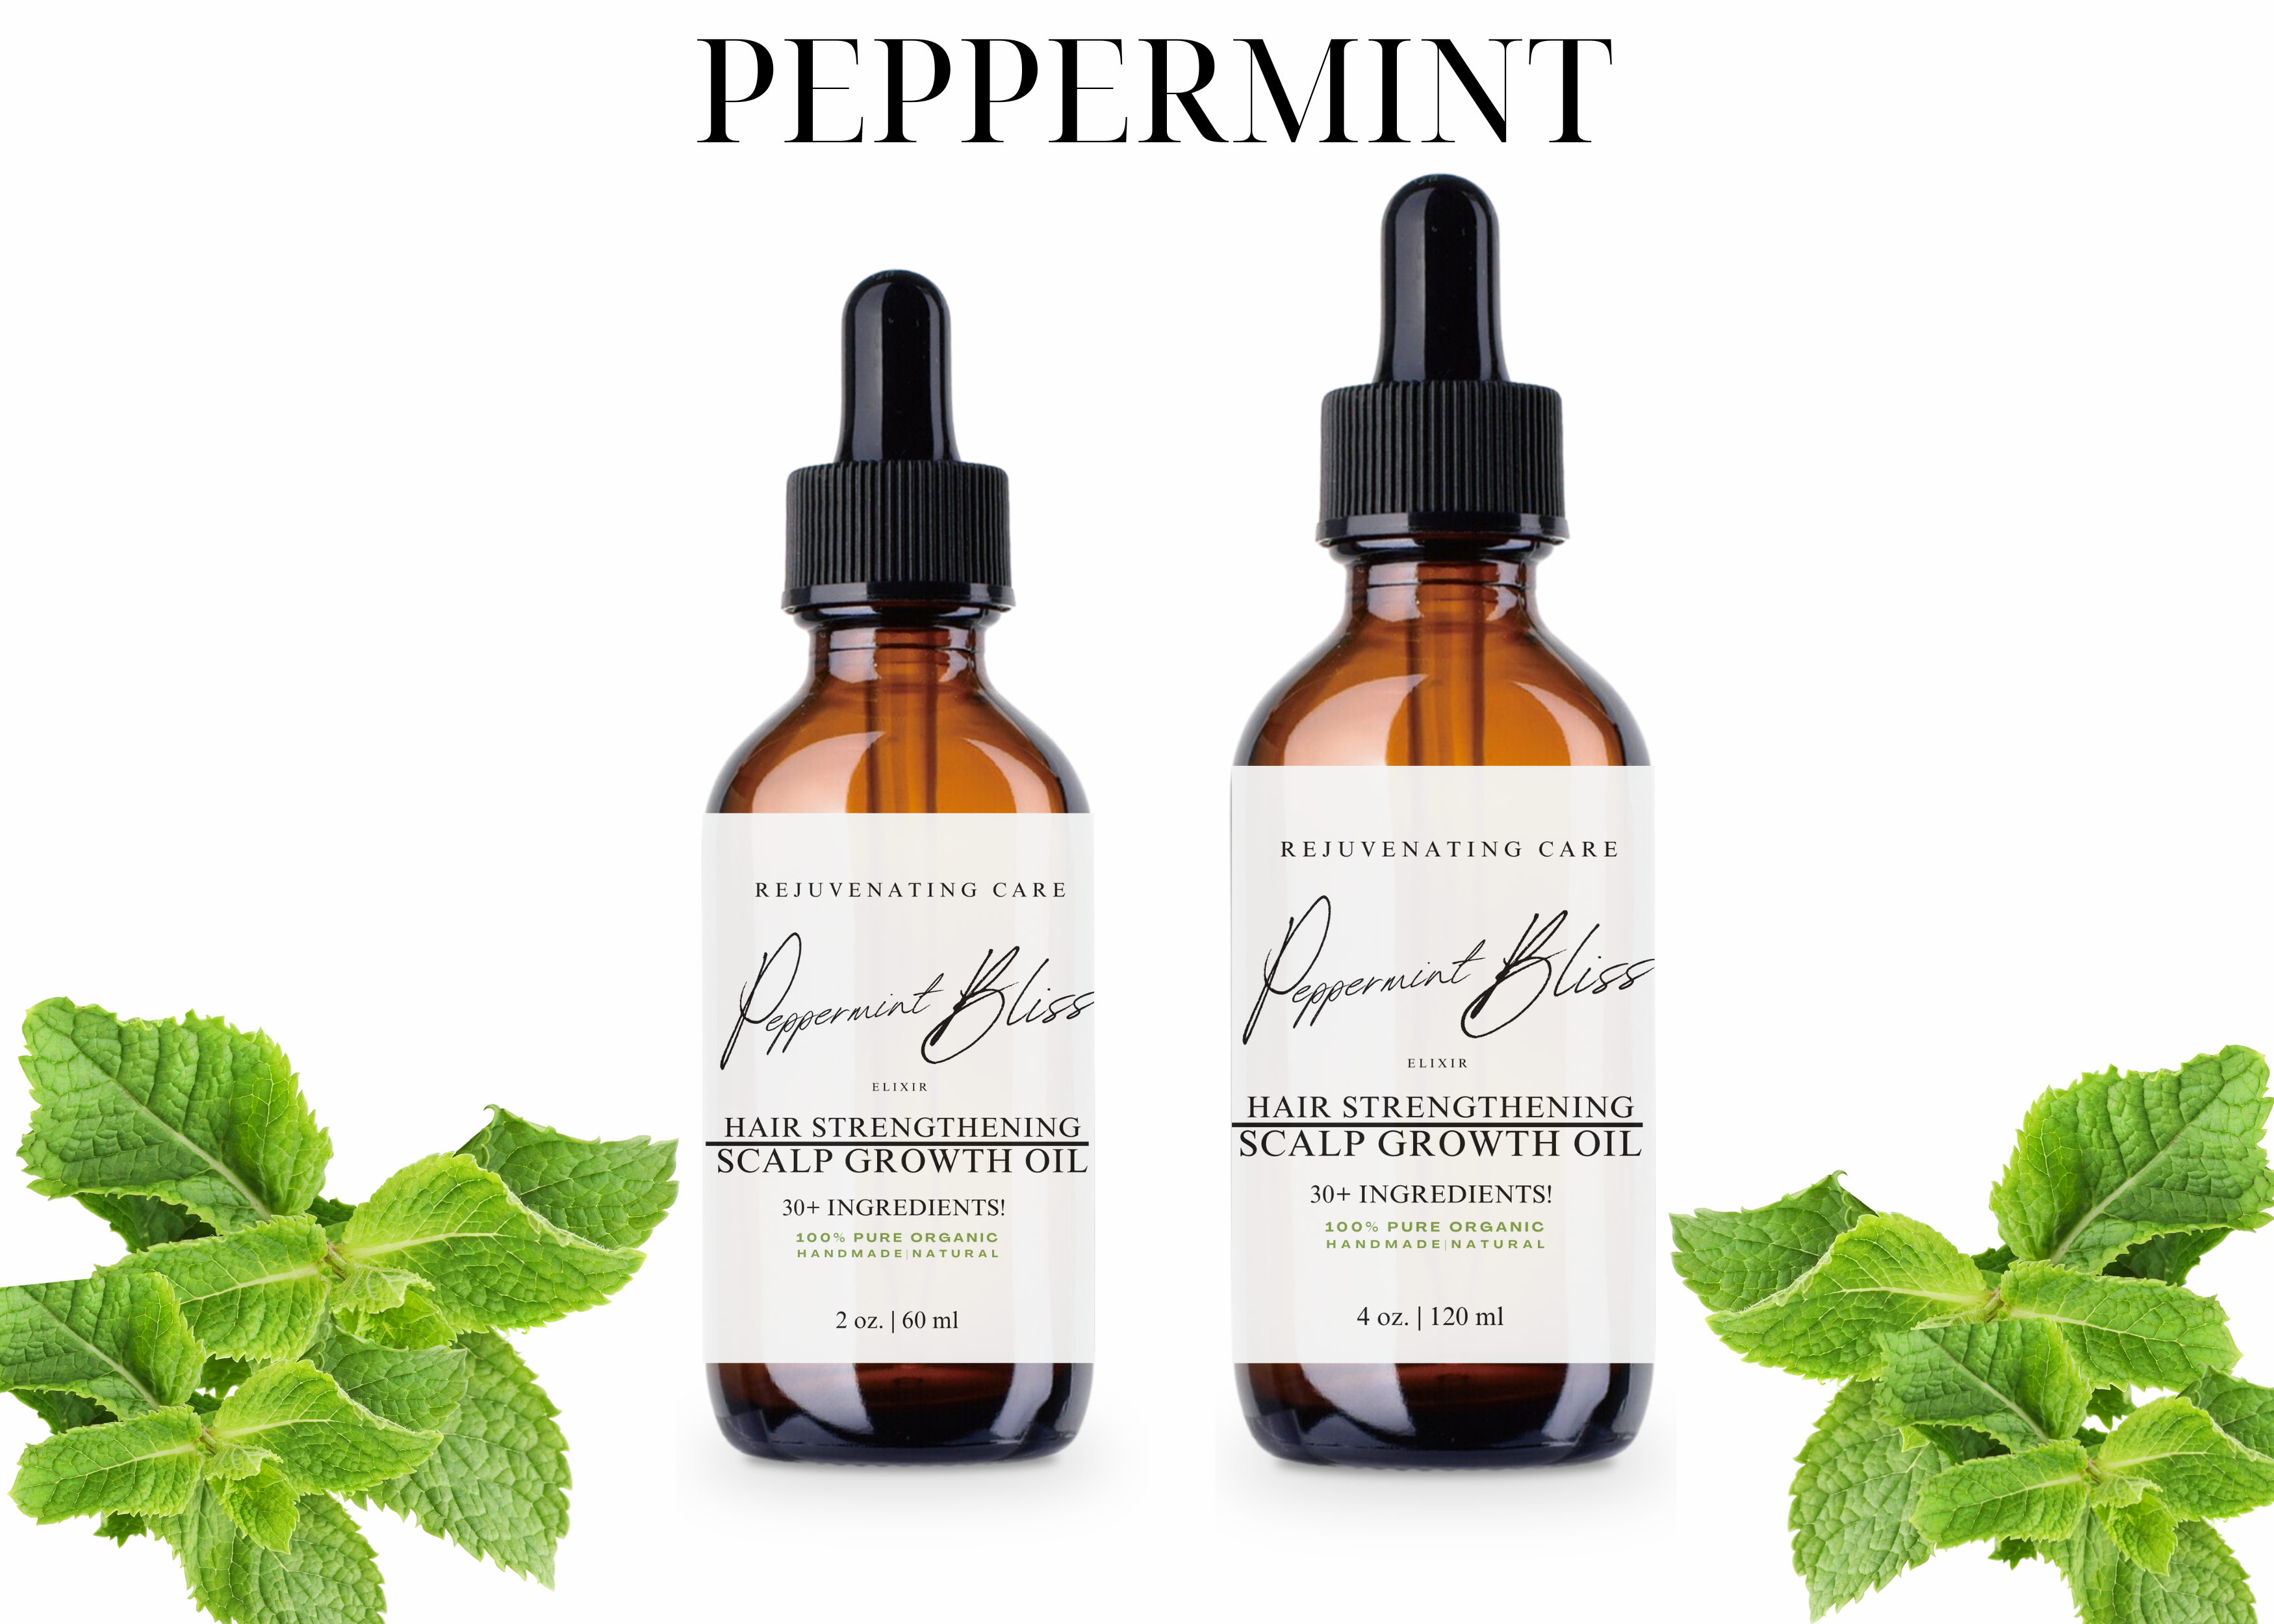 Peppermint Hair Strengthening and Scalp Growth Oil 2oz